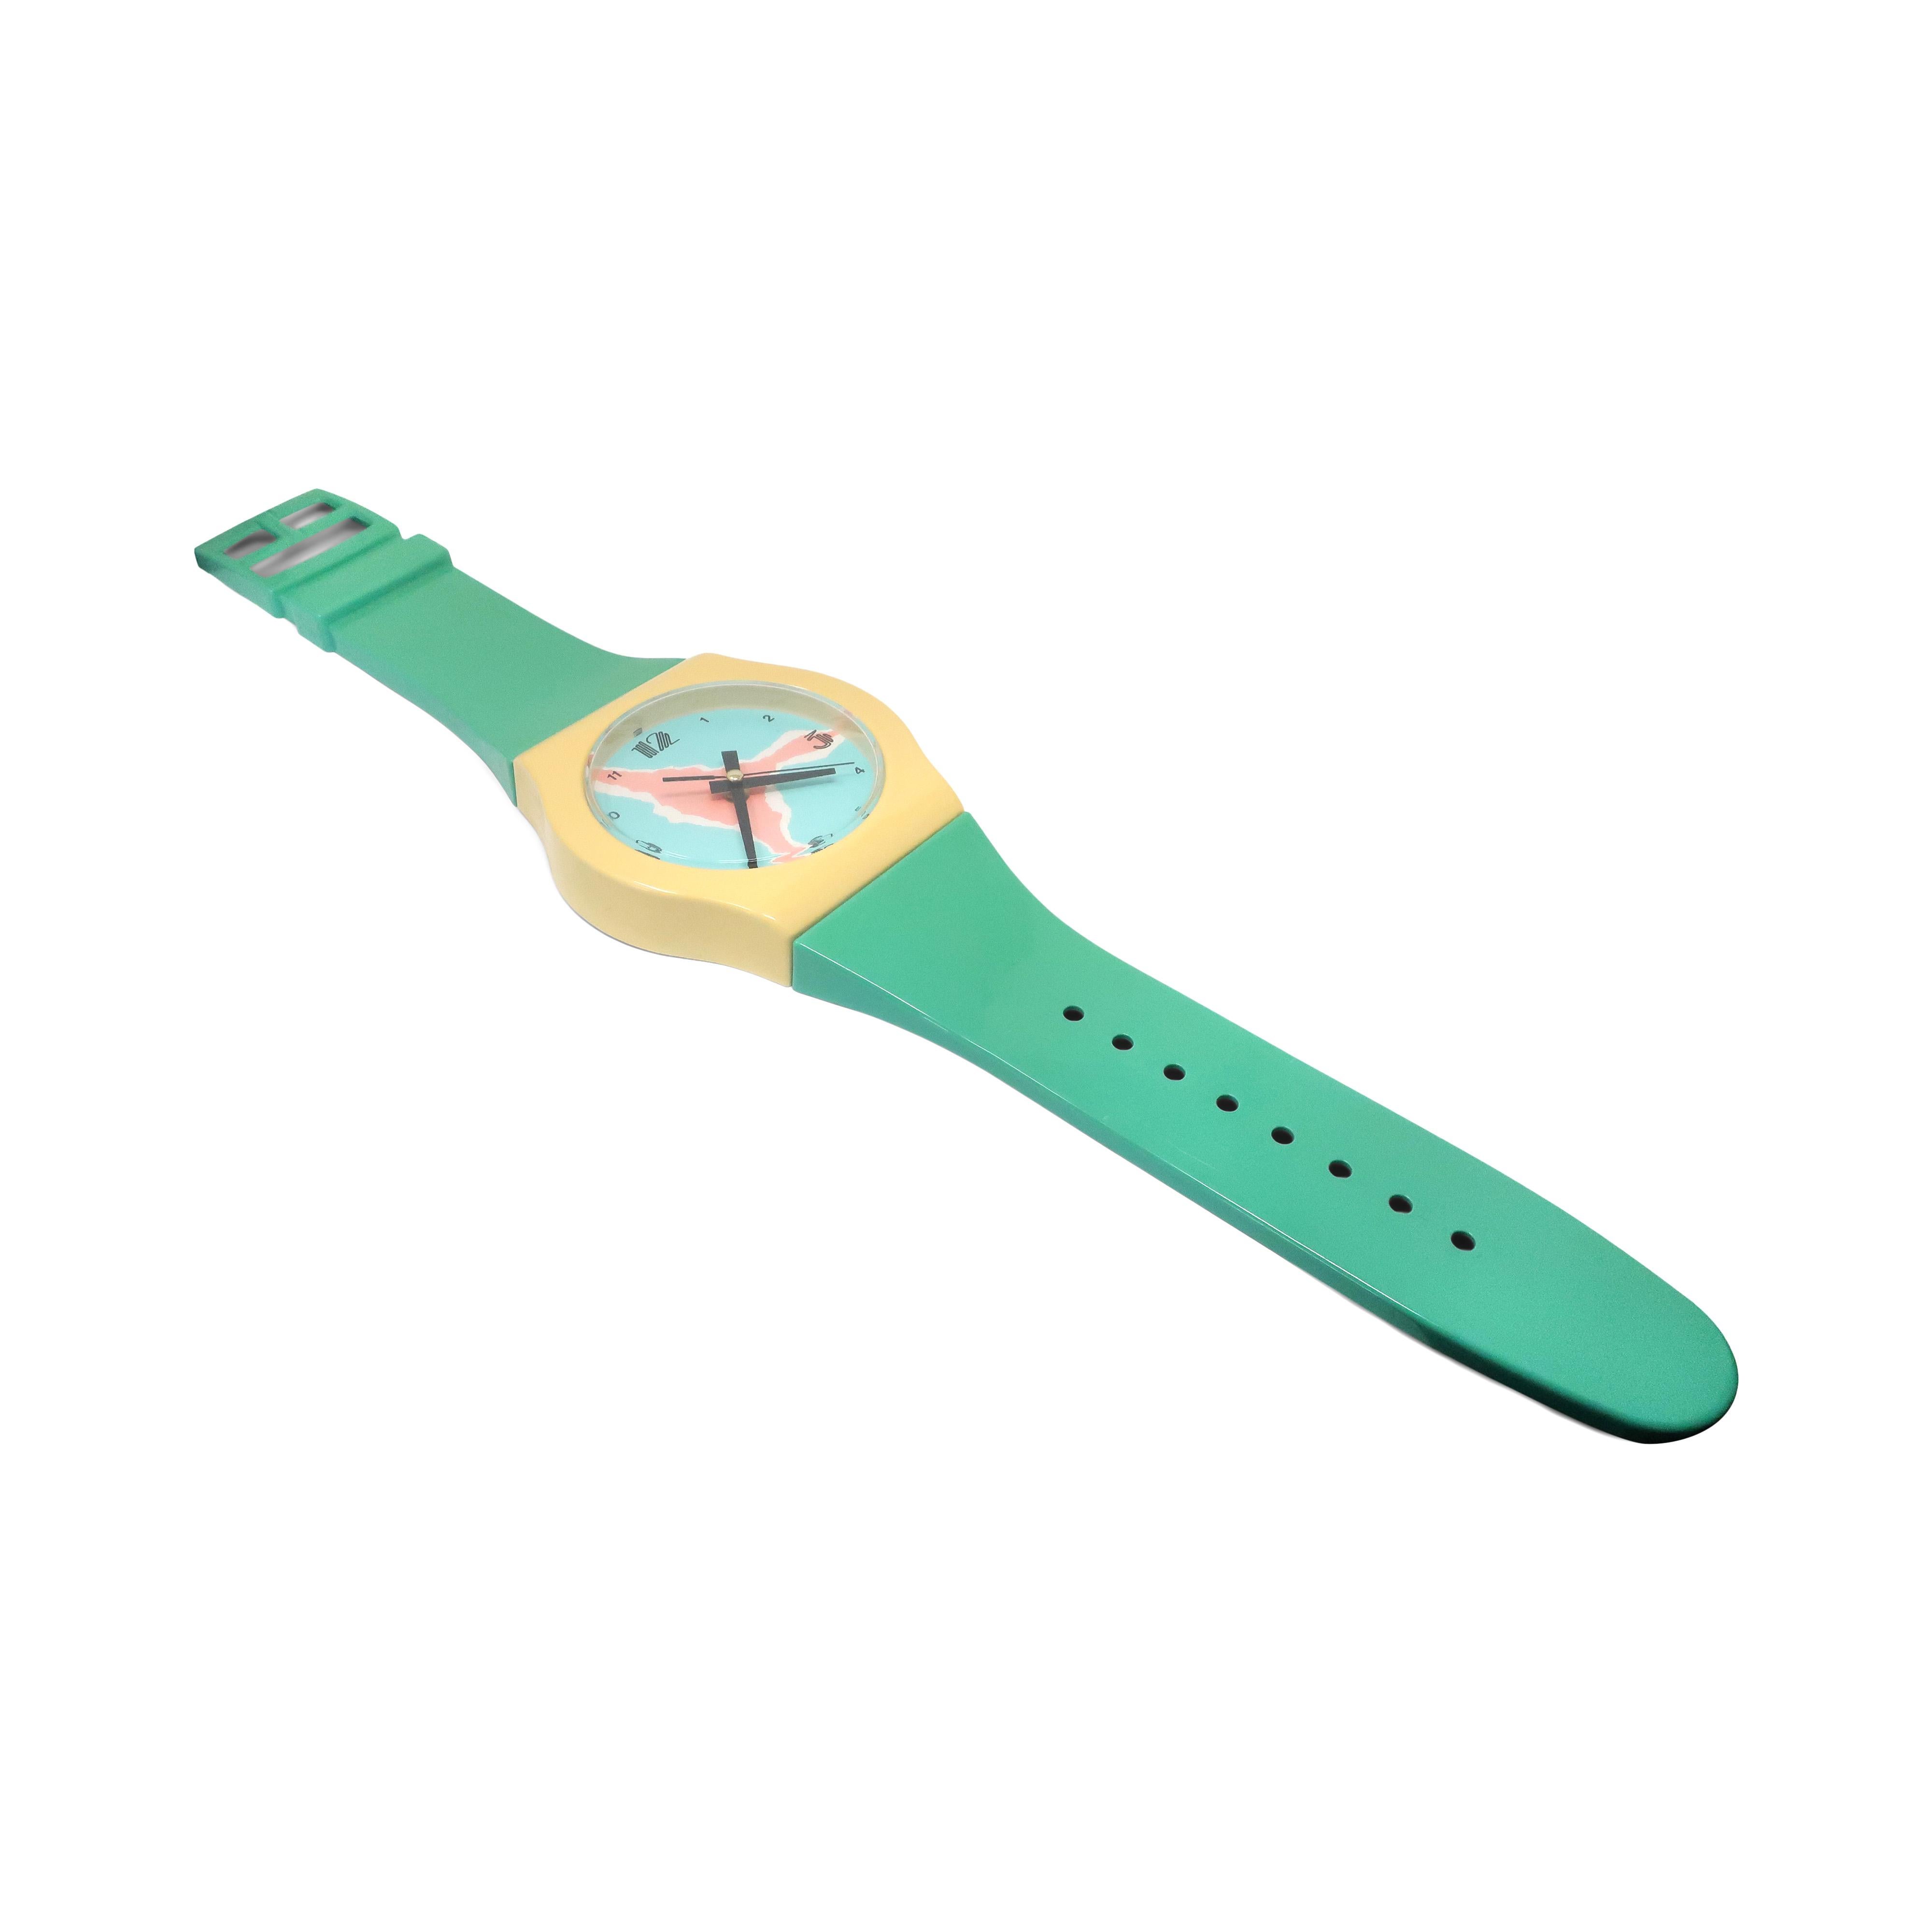 A fantastic vintage 1980s green, yellow, and pink wrist watch wall clock, in the vein of Swatch’s great designs. With a green band, yellow bezel, turquoise and pink face, and black hands, this is a stunner! In good vintage condition with wear